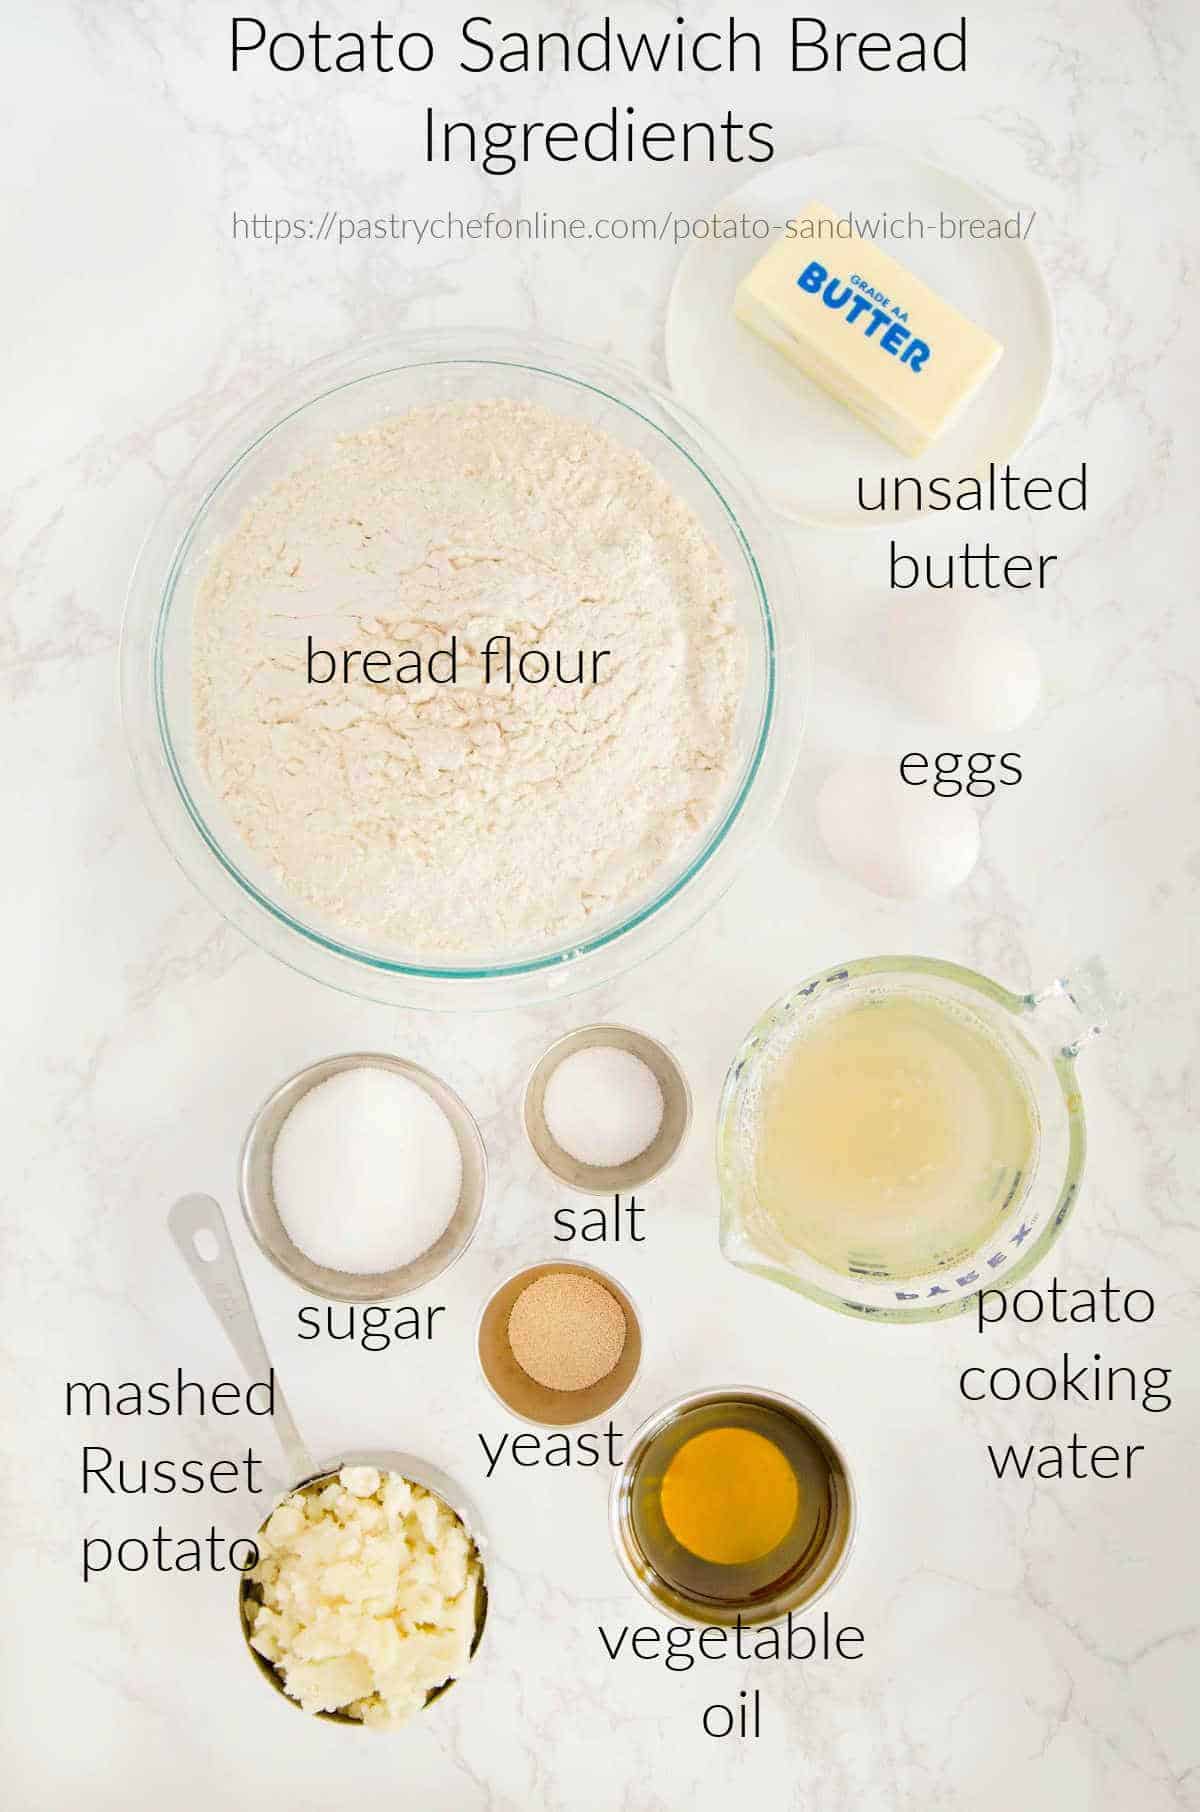 An overhead view of all the ingredients needed to make potato bread: butter, bread flour, eggs, sugar, salt, Russet potato, potato cooking water, yeast, and vegetable oil.